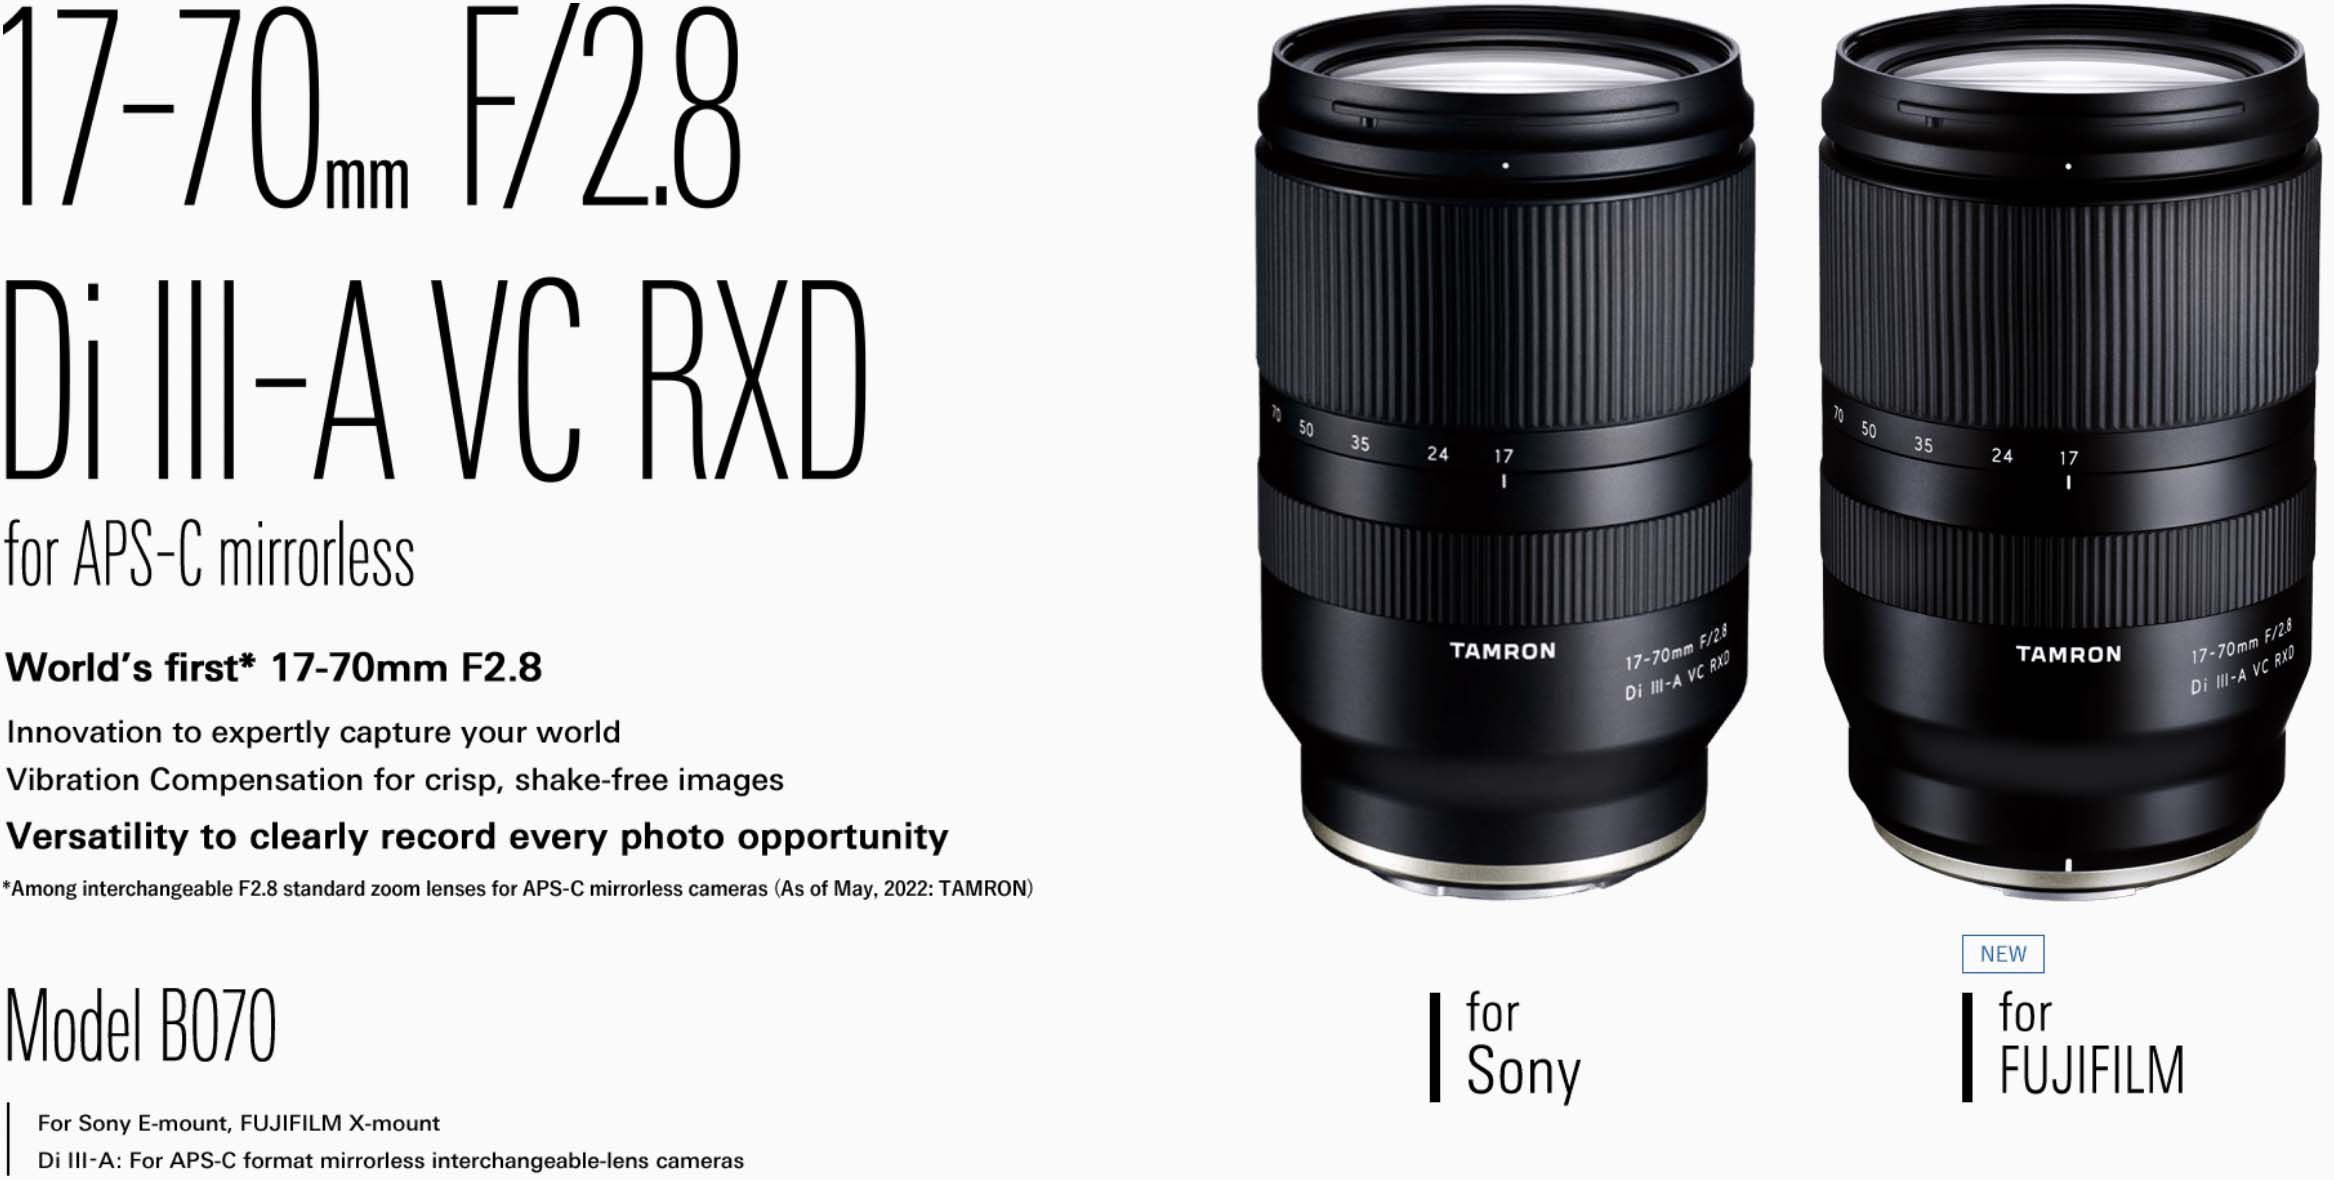 RW: Tamron 17-70mm f/2.8 Di III-A VC RXD Review - It Ticks All The